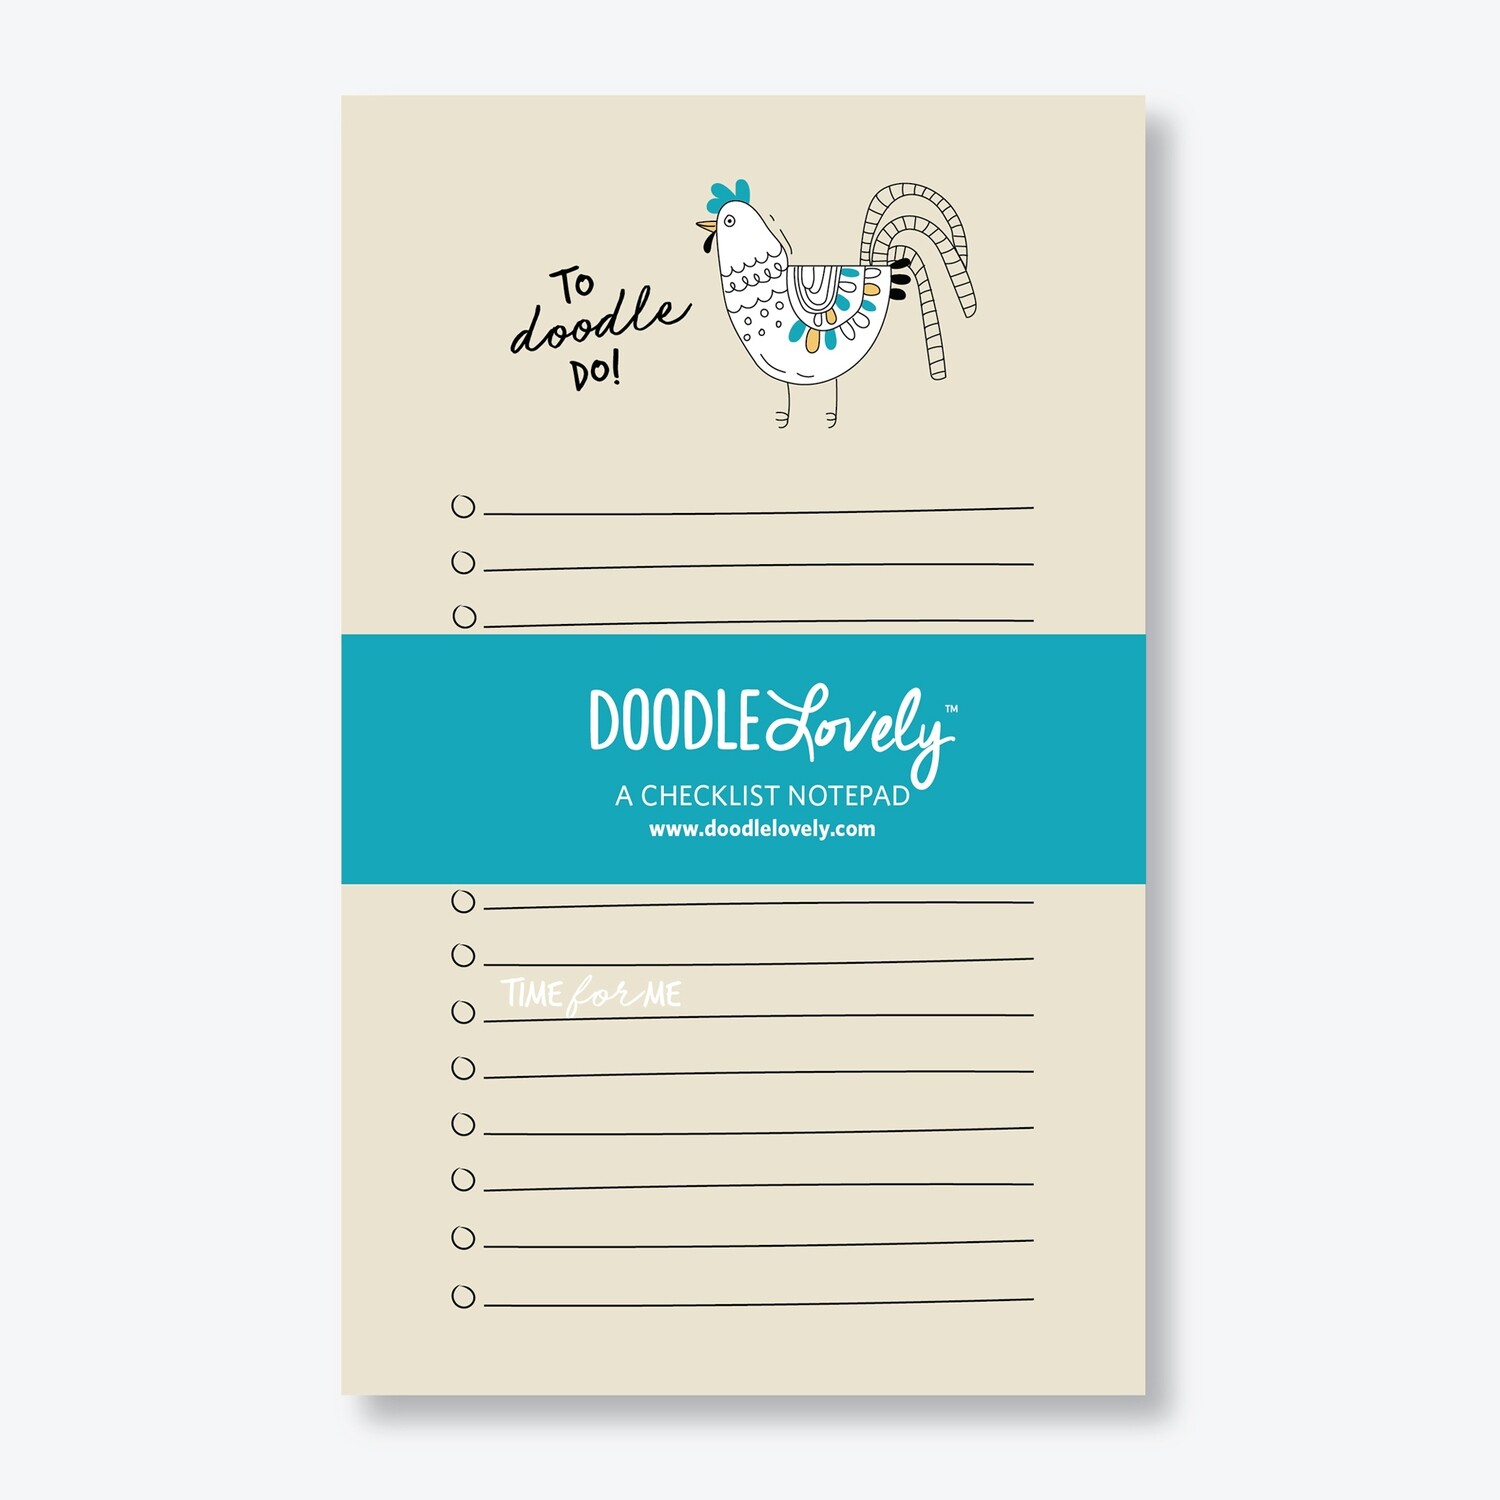 To Doodle Do Note Pad